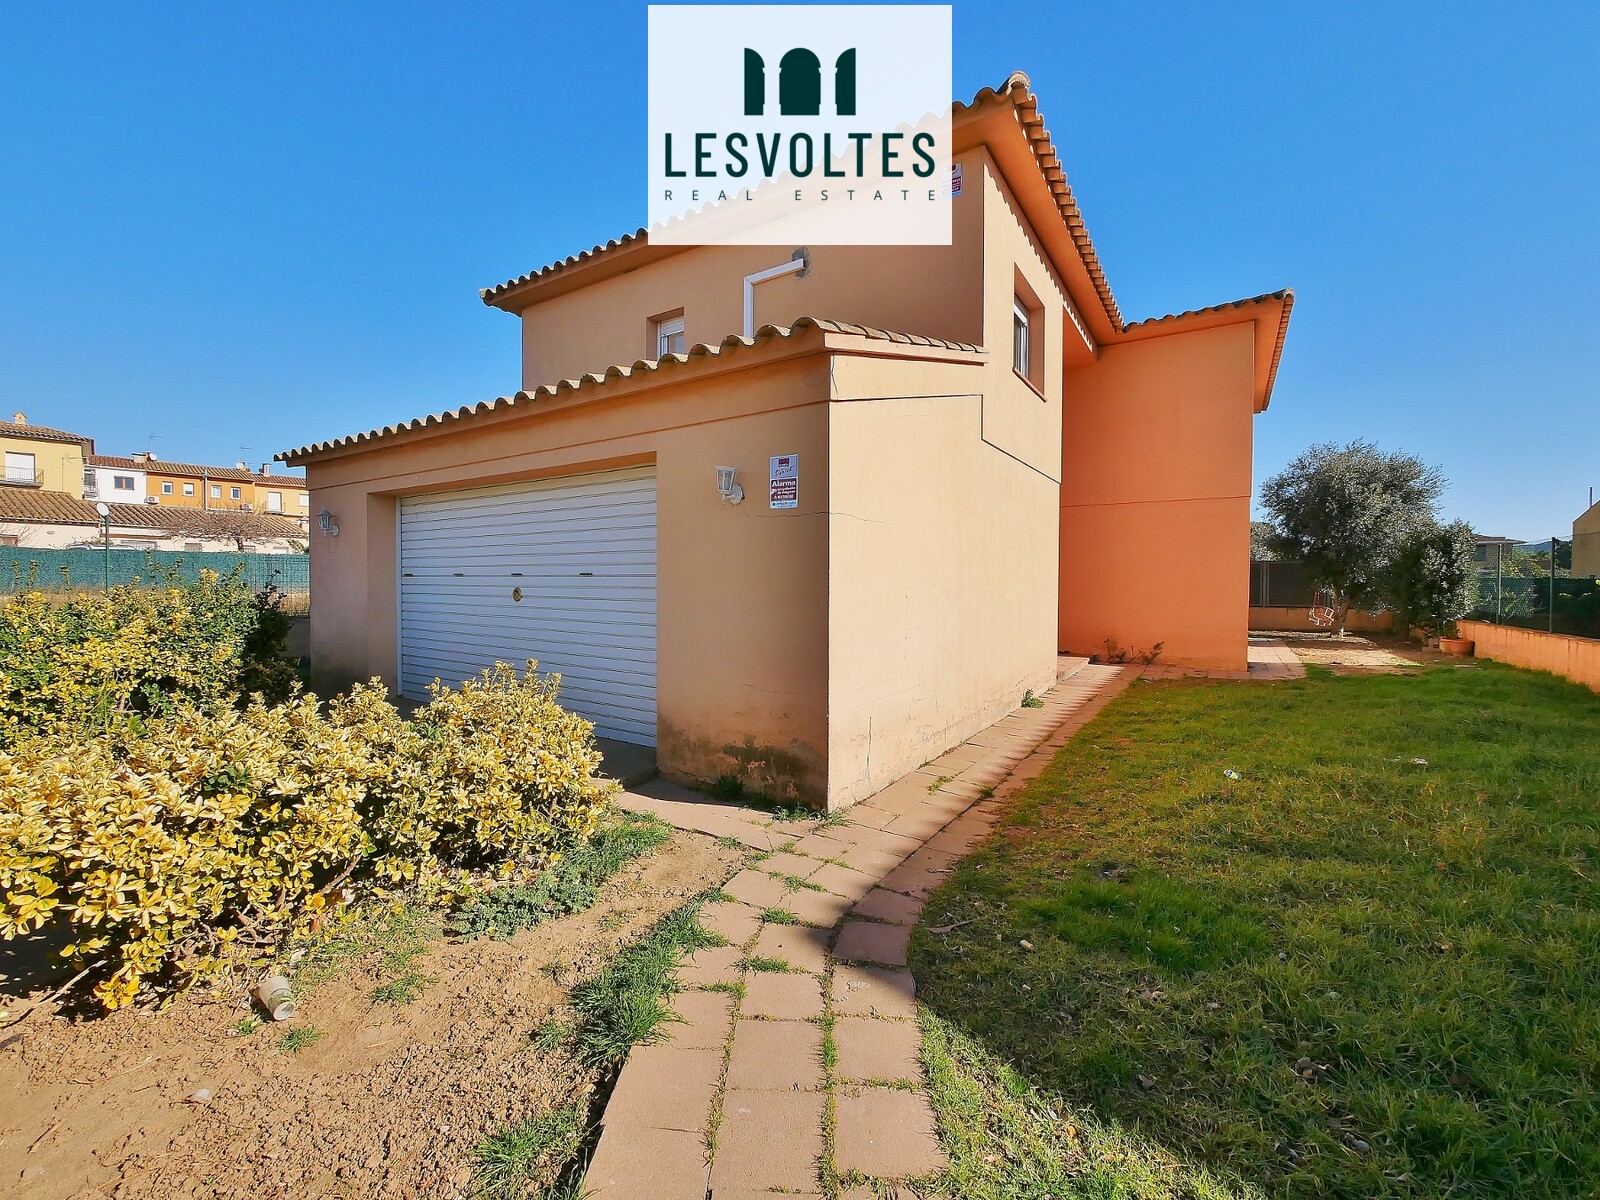 DETACHED HOUSE WITH GARAGE AND GARDEN IN RESIDENTIAL AREA OF PALAFRUGELL.